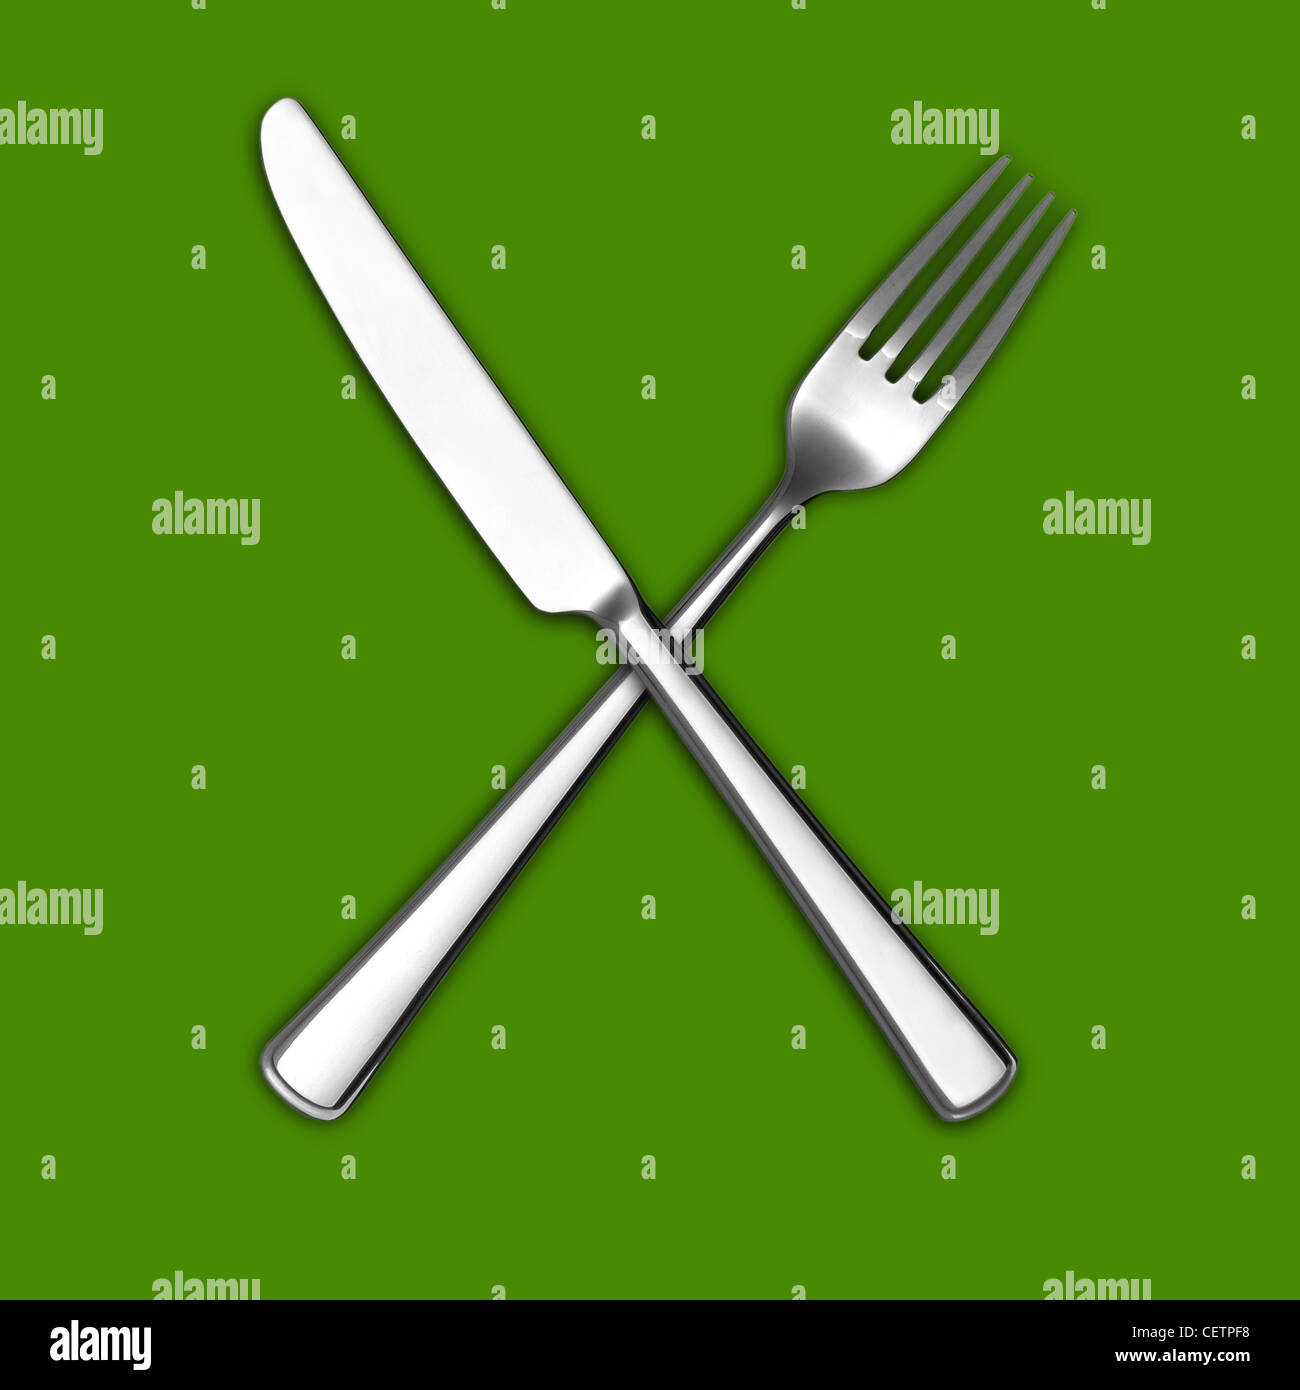 A still life shot of a knife and fork crossed on a green ...